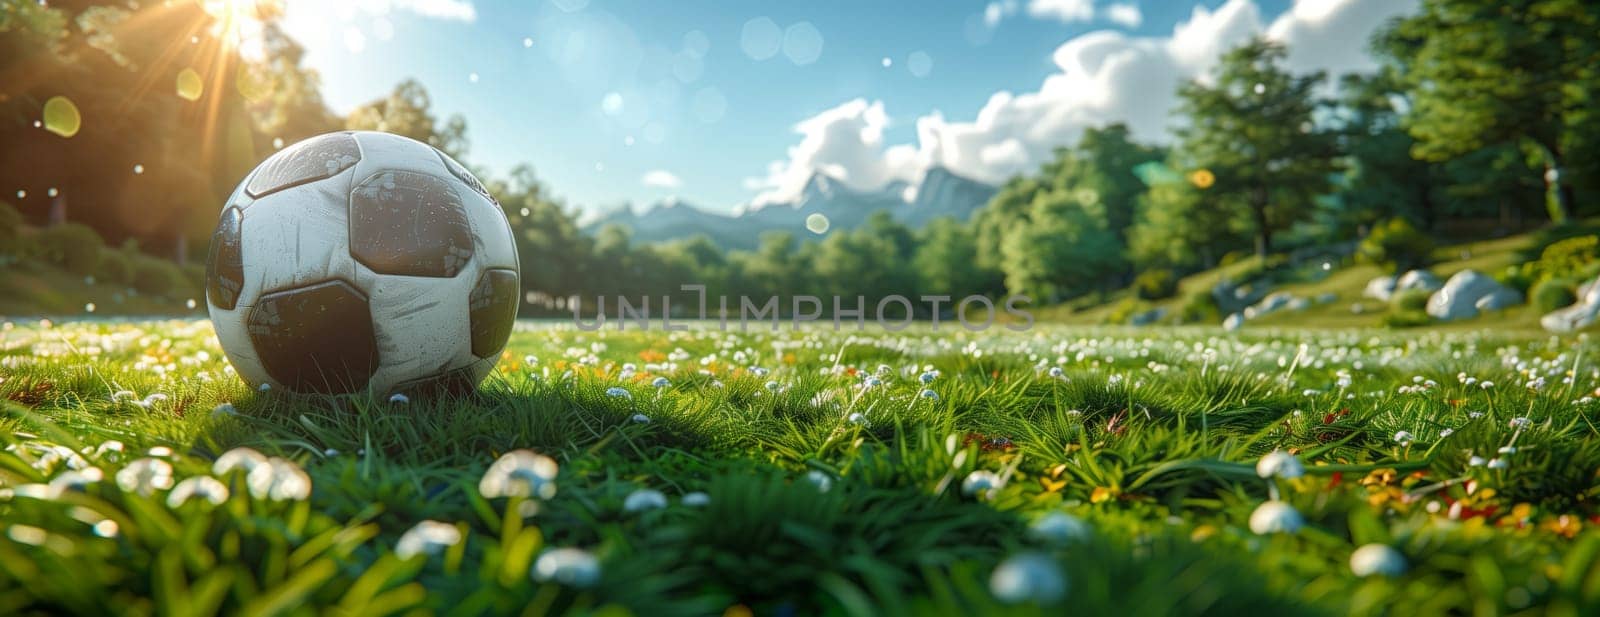 A soccer ball rests on the lush green grass of a natural landscape, surrounded by terrestrial plants and trees under a cloudy sky